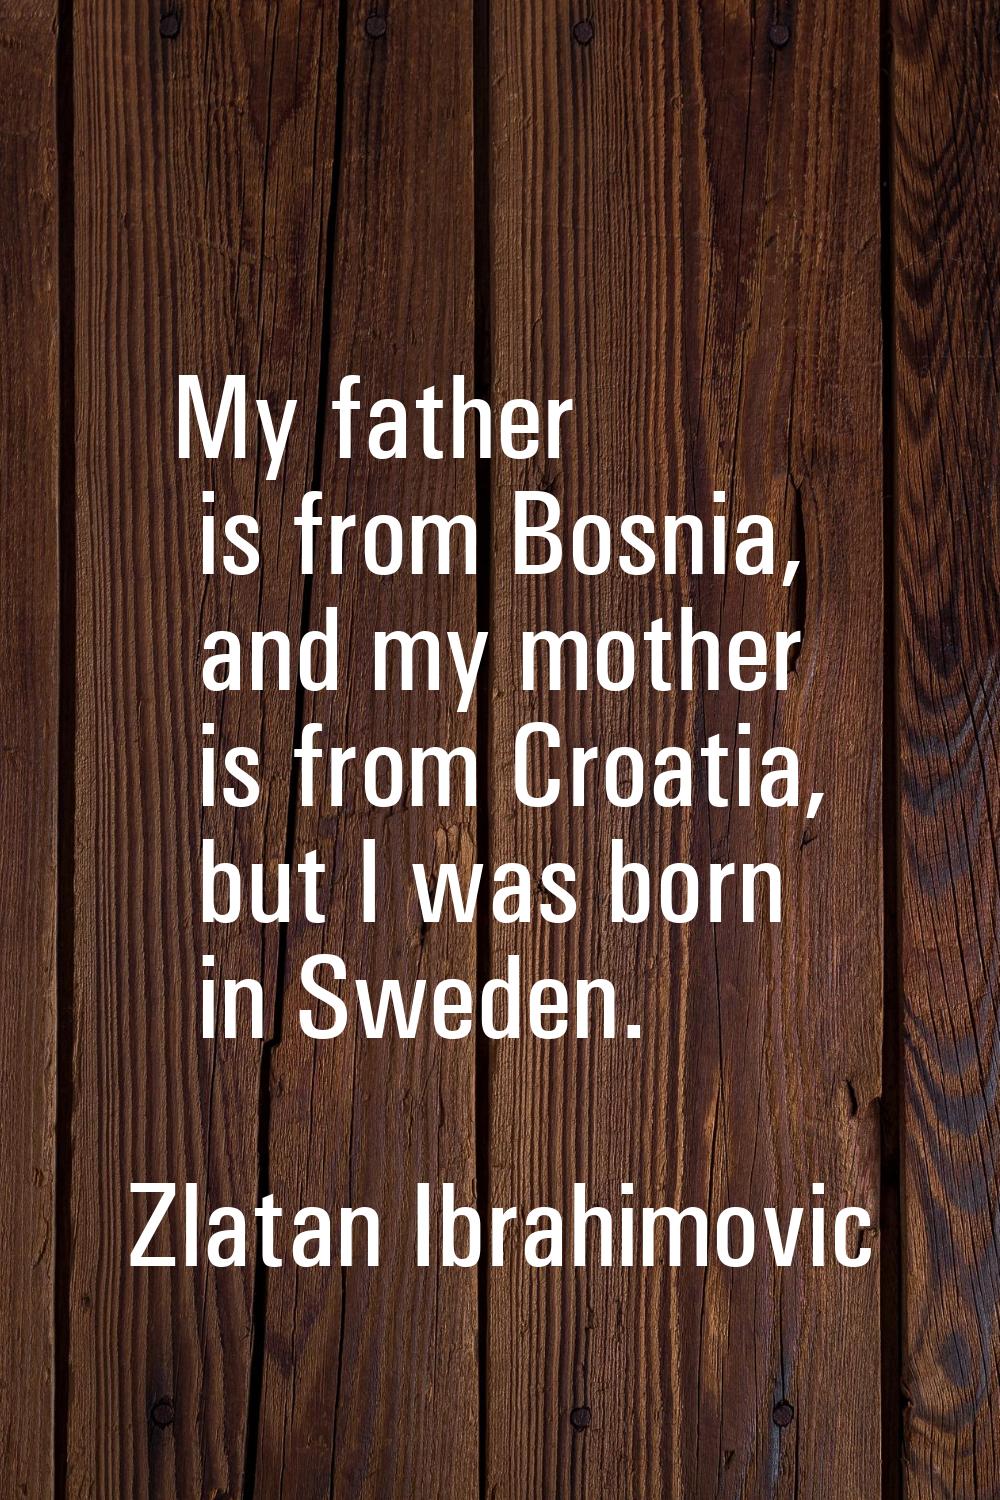 My father is from Bosnia, and my mother is from Croatia, but I was born in Sweden.